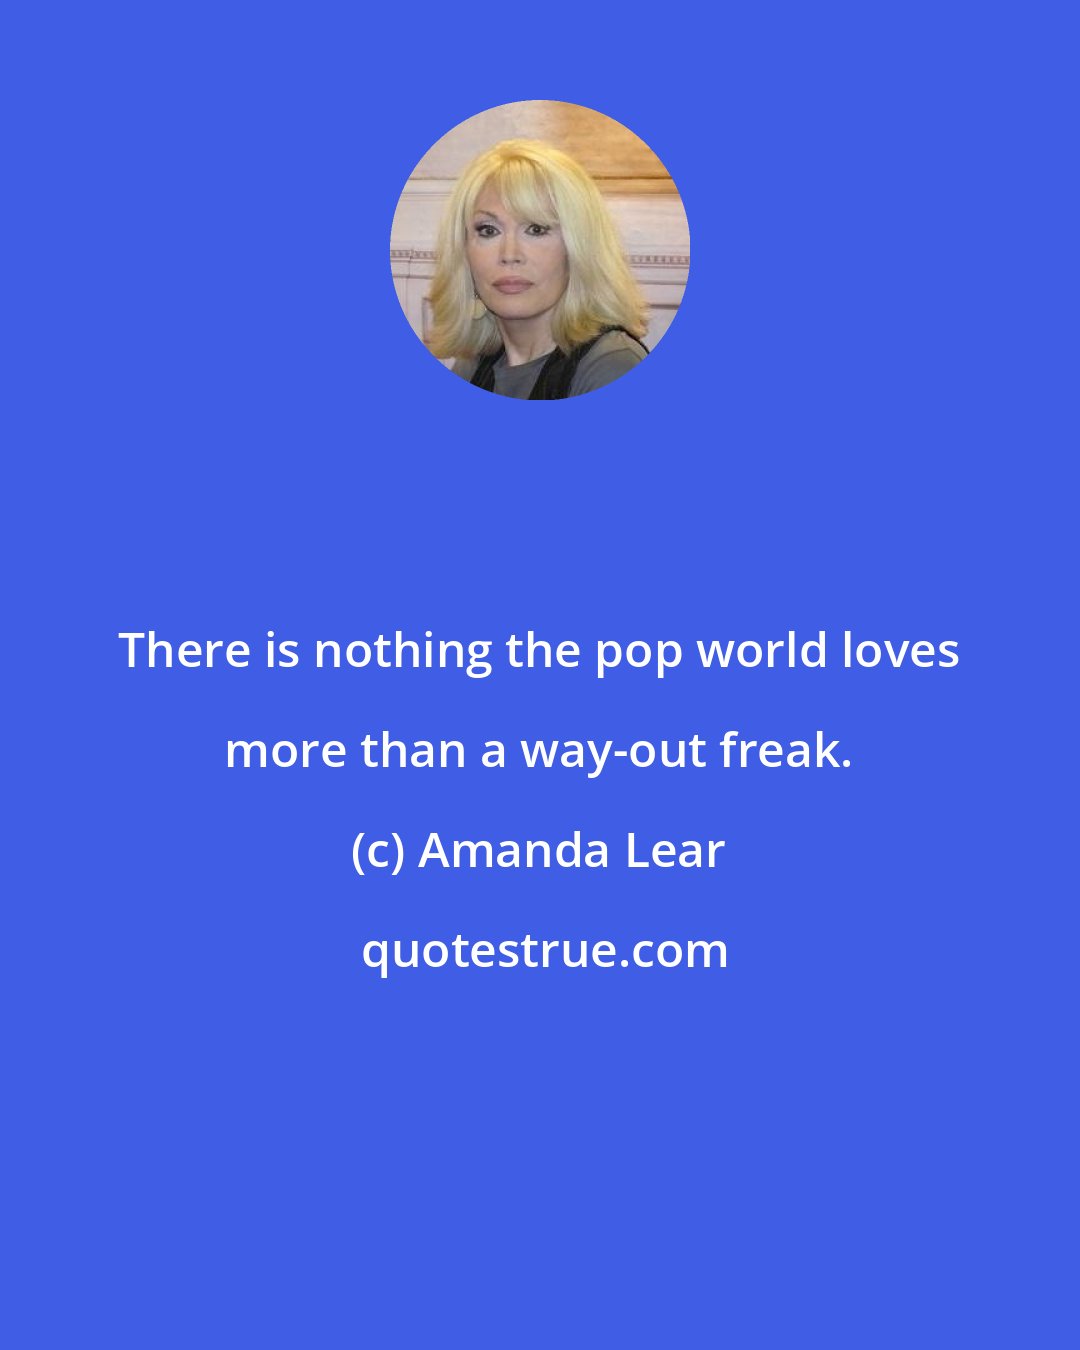 Amanda Lear: There is nothing the pop world loves more than a way-out freak.